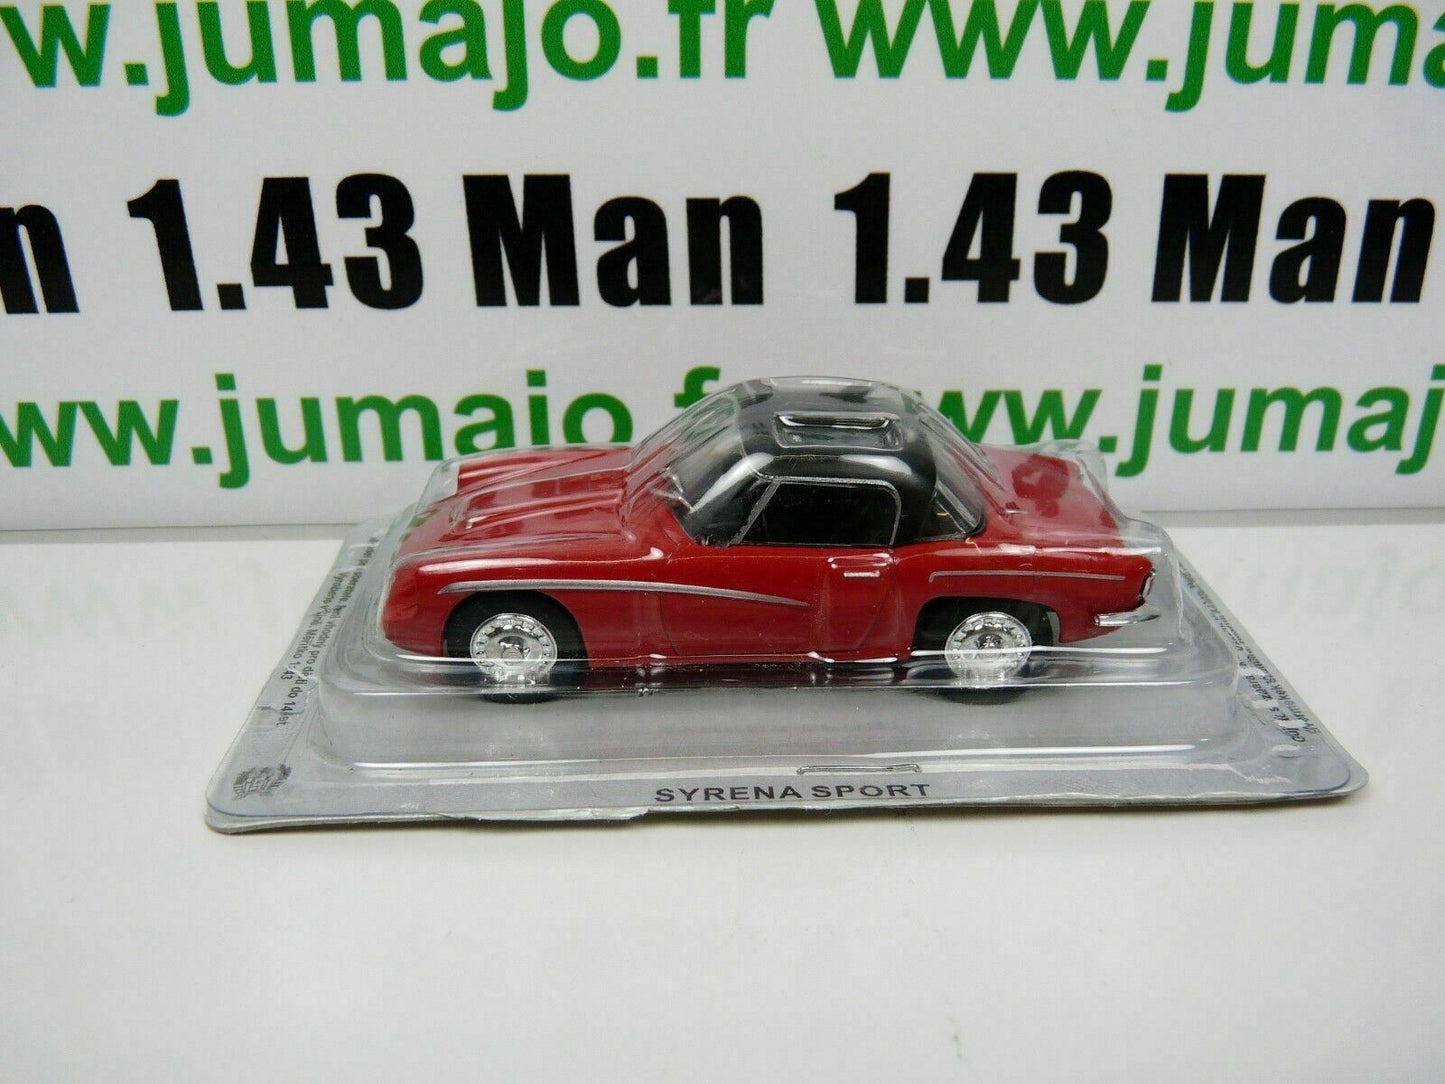 PL187 VOITURE 1/43 IXO IST déagostini POLOGNE : SYRENA SPORT